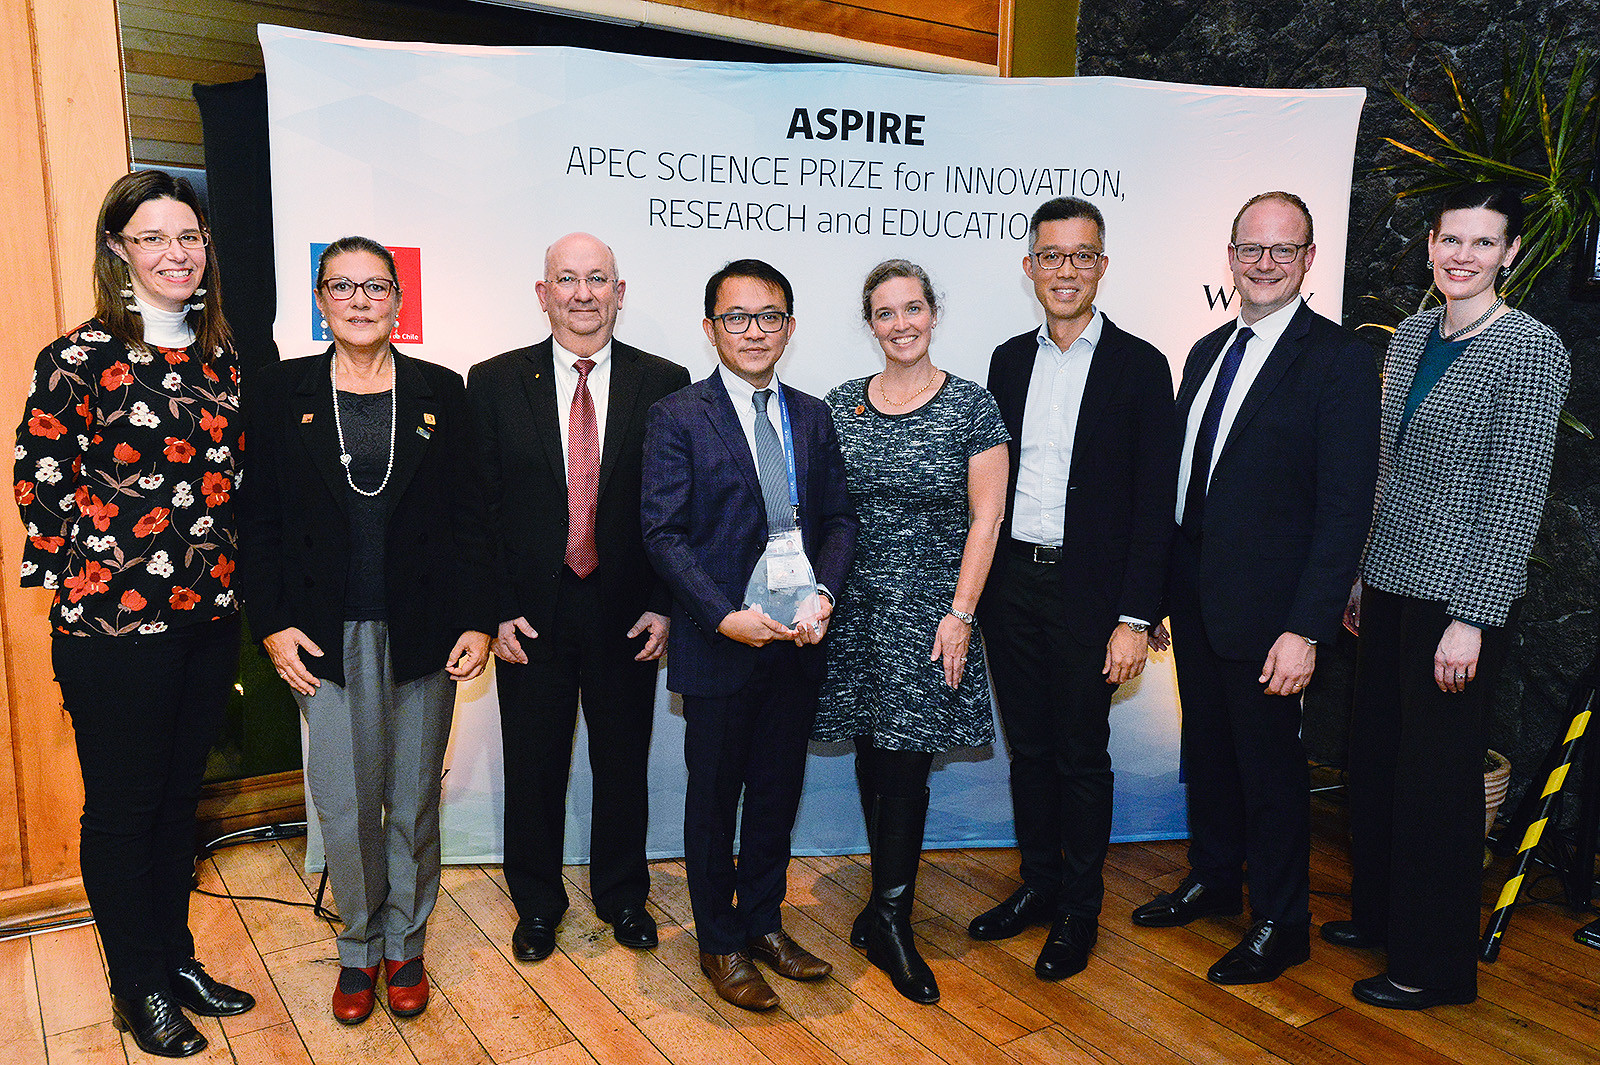 Dr Ng Yun-hau (4th from left), Associate Professor of CityU’s School of Energy and Environment, receives this year’s APEC Science Prize for Innovation, Research and Education (ASPIRE) for his contributions to the discipline of photoelectrocatalysis.